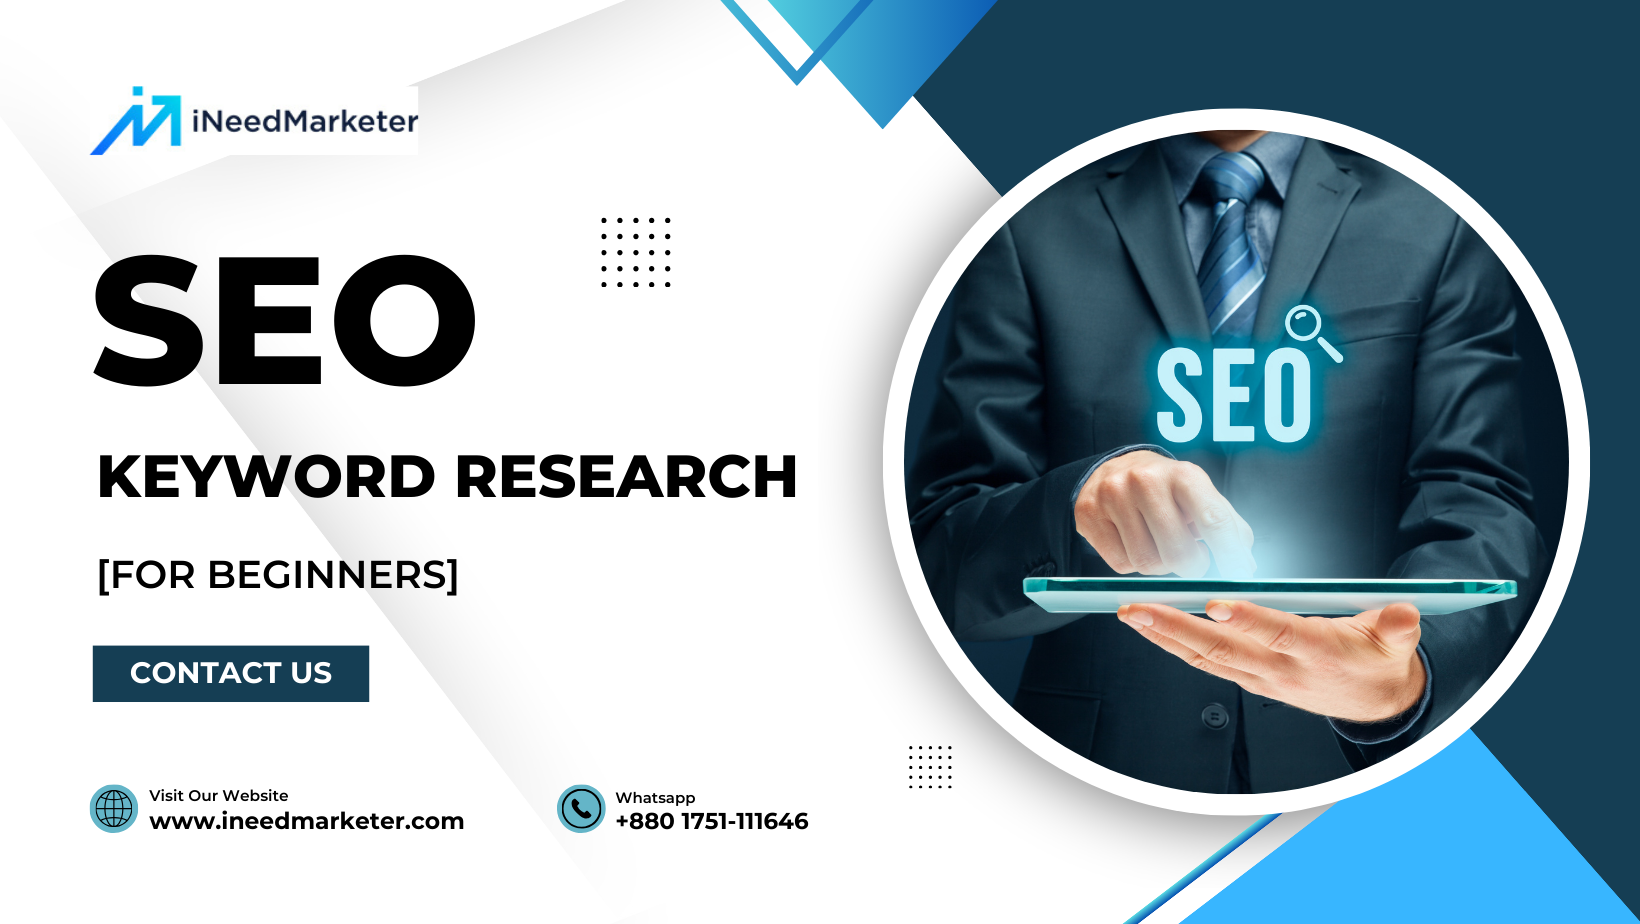 How can we do SEO keyword research [For beginners]